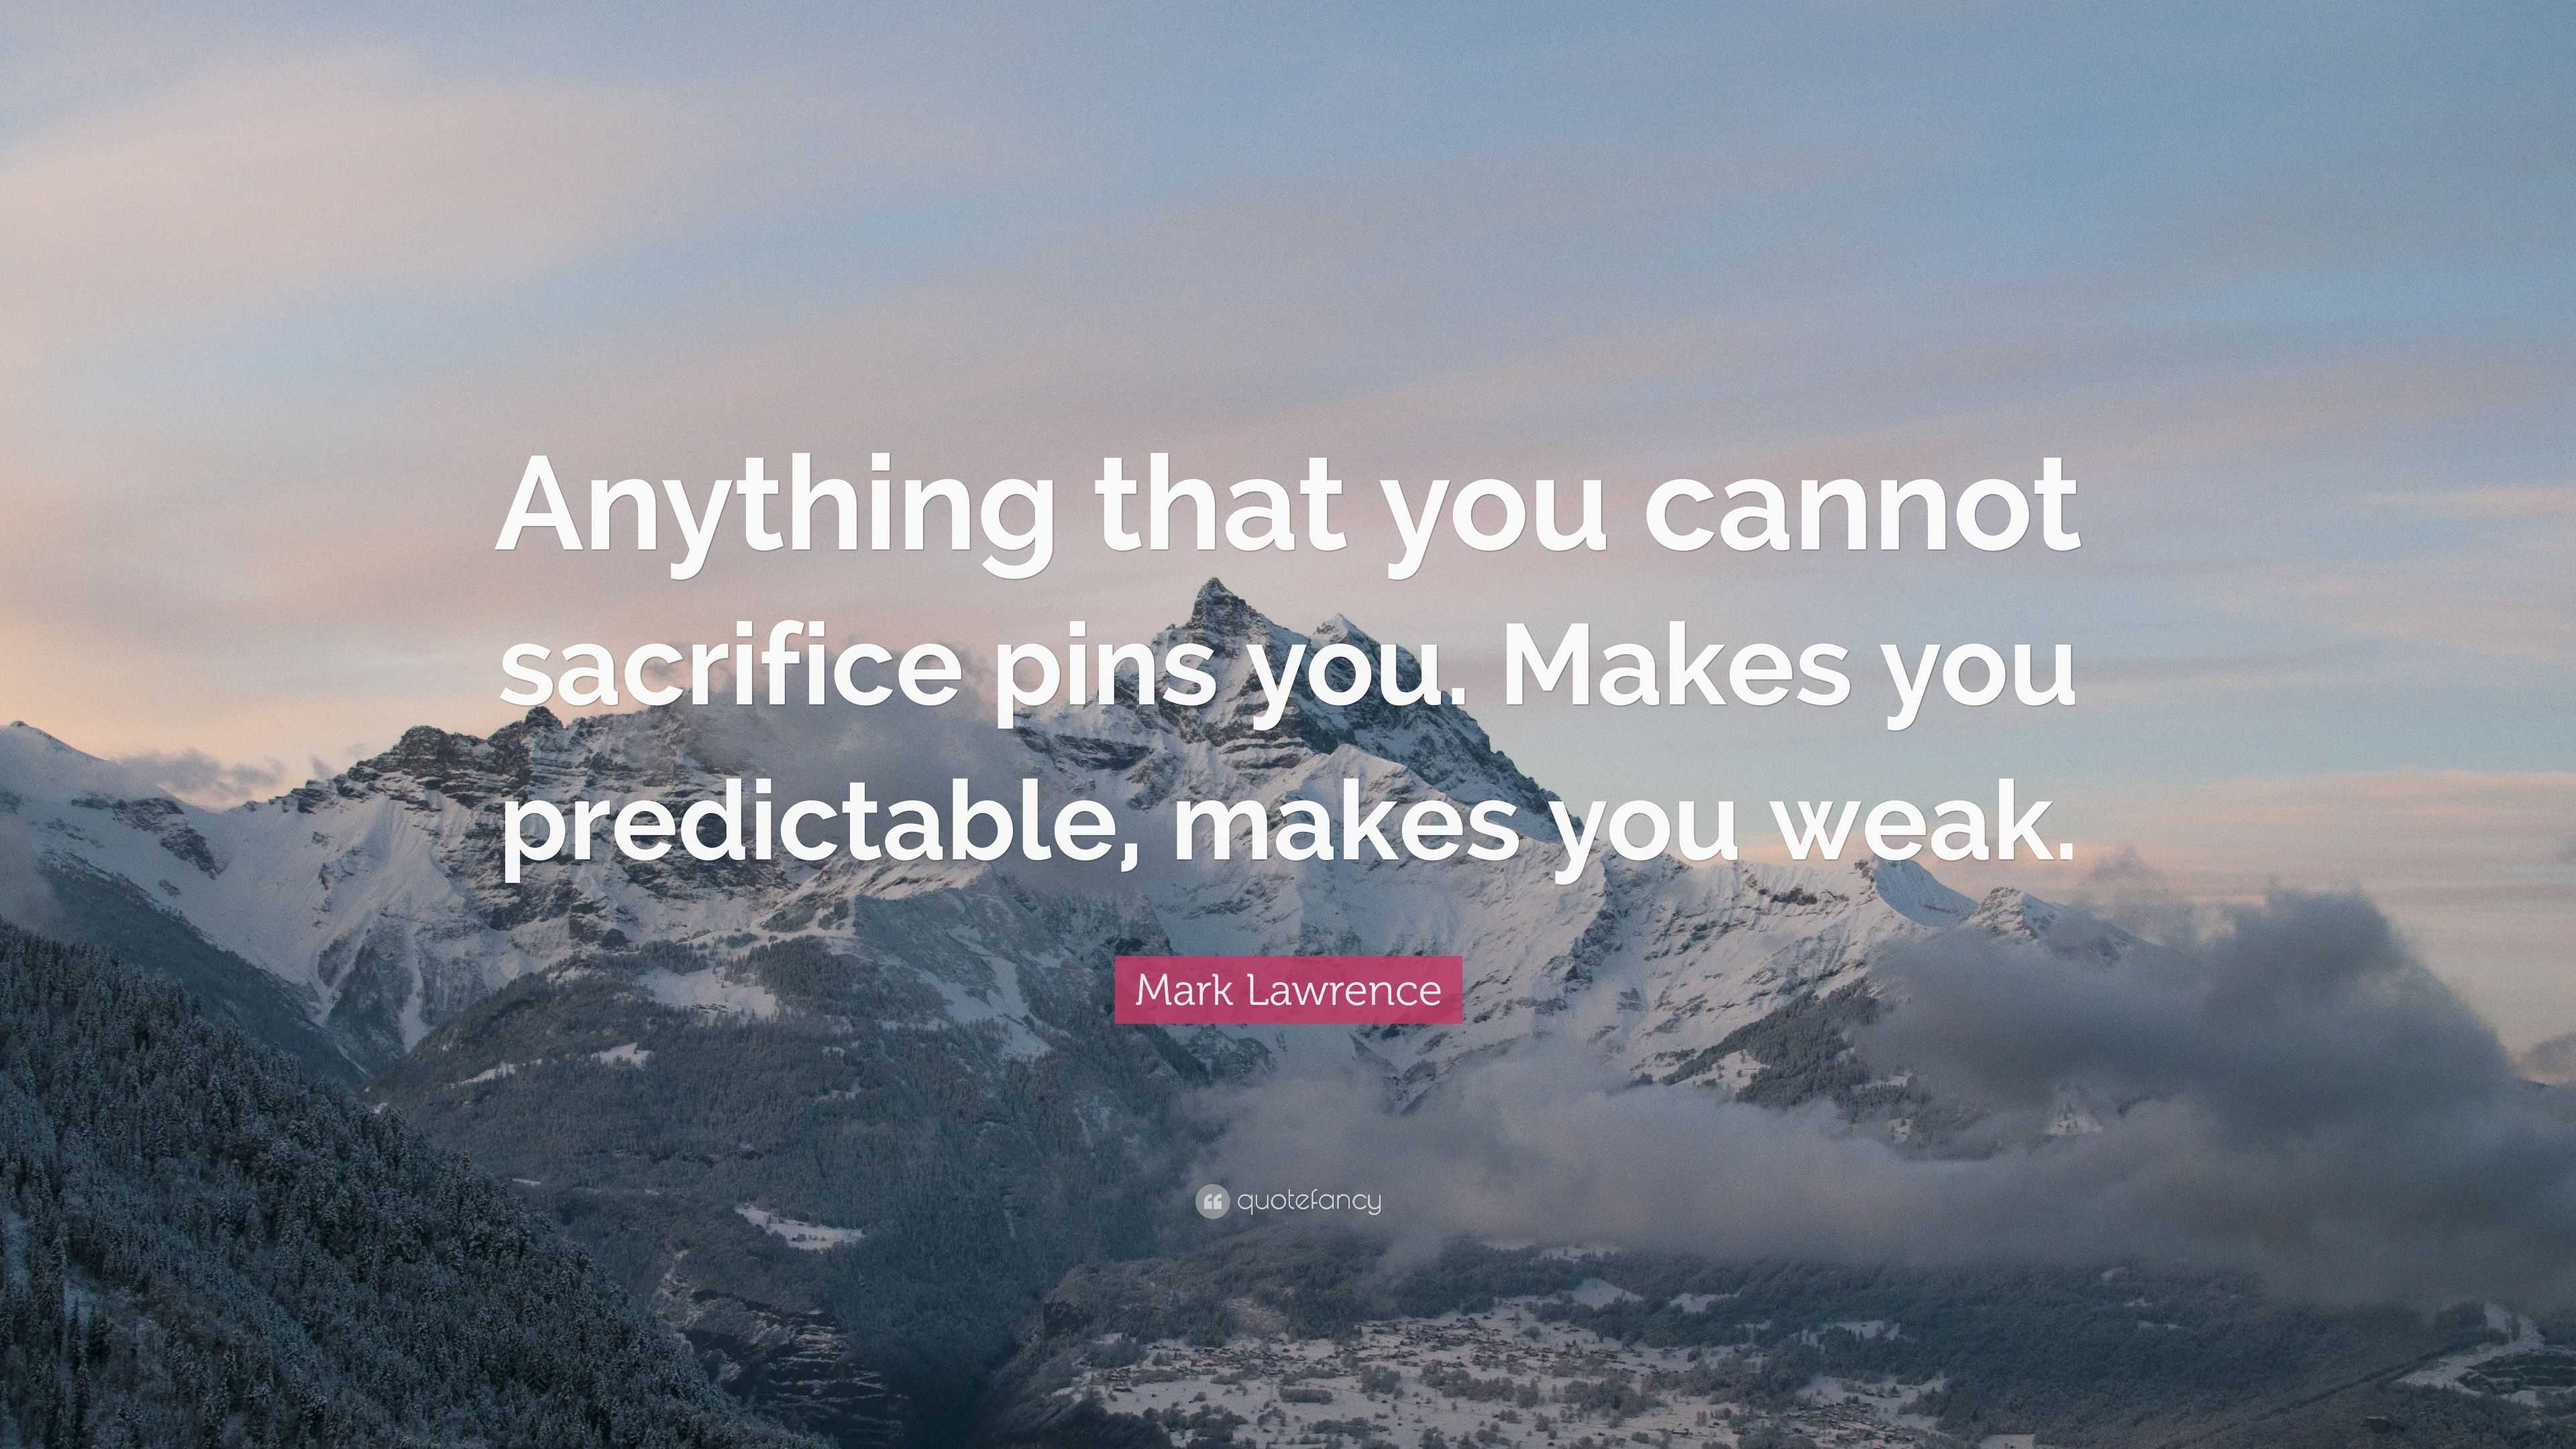 Mark Lawrence Quote: “Anything that you cannot sacrifice pins you ...